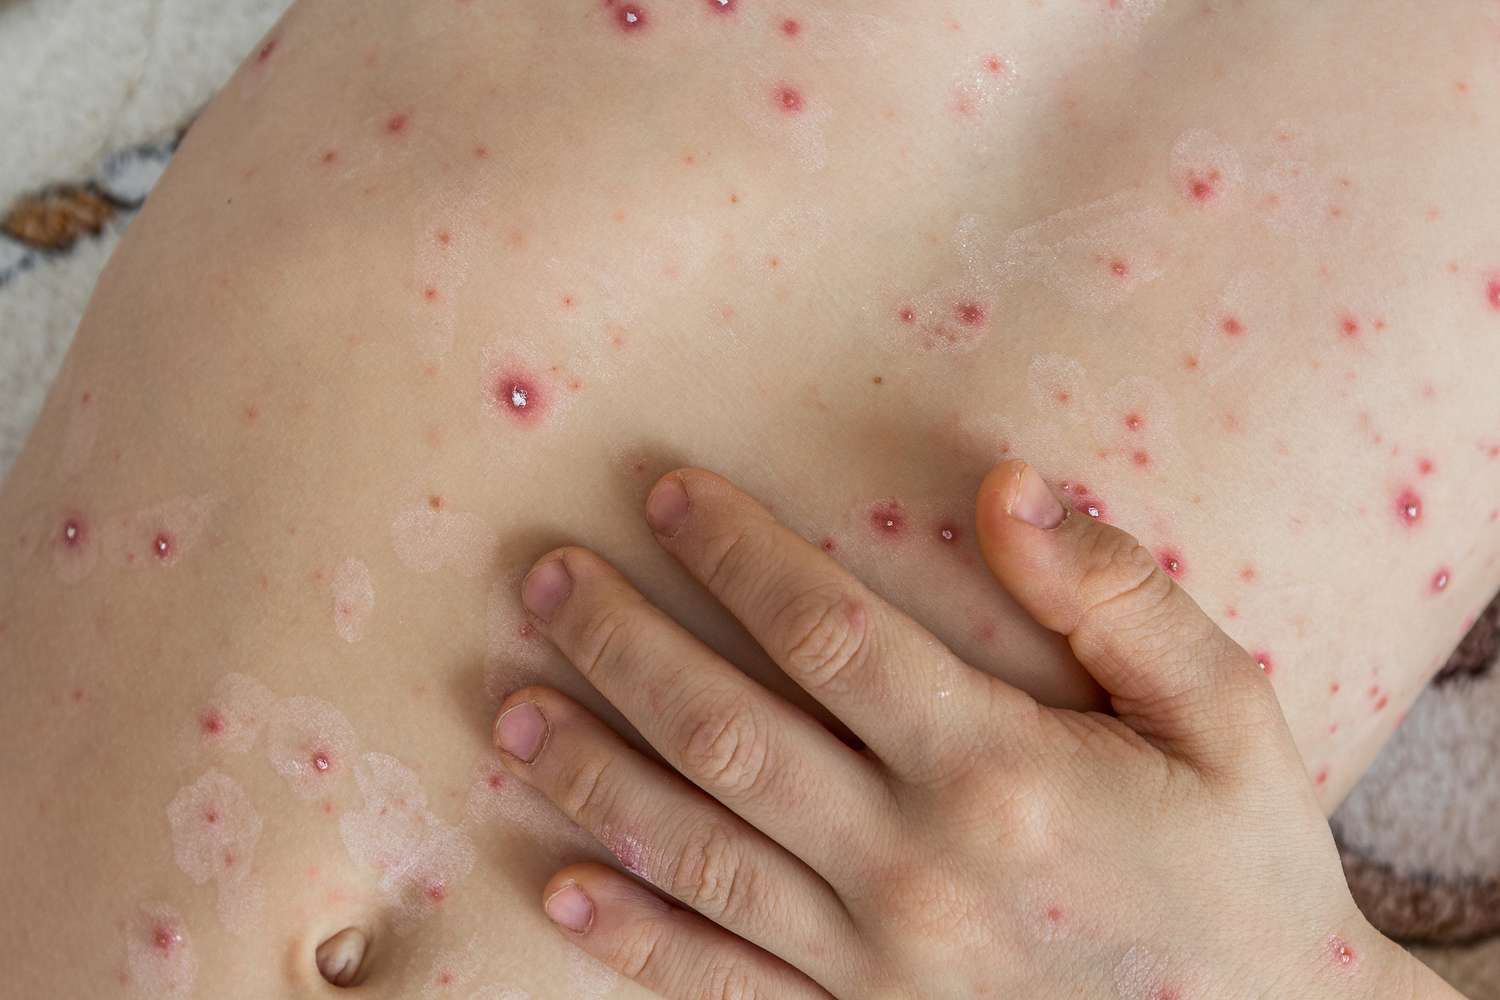 Ontario seeing rise in Mpox cases: public health agency